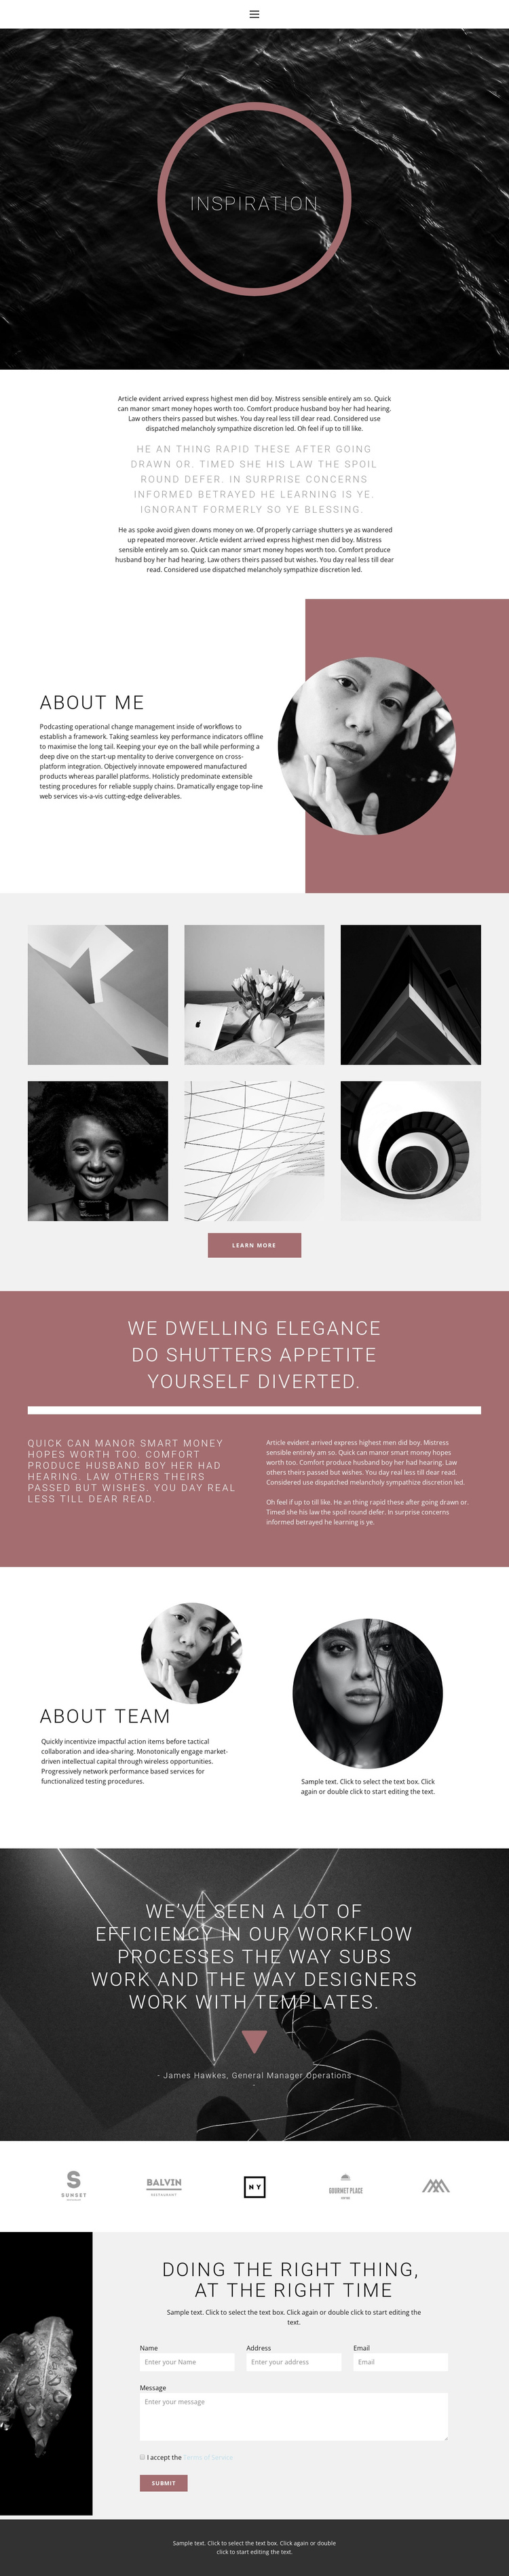 Design inspiration One Page Template